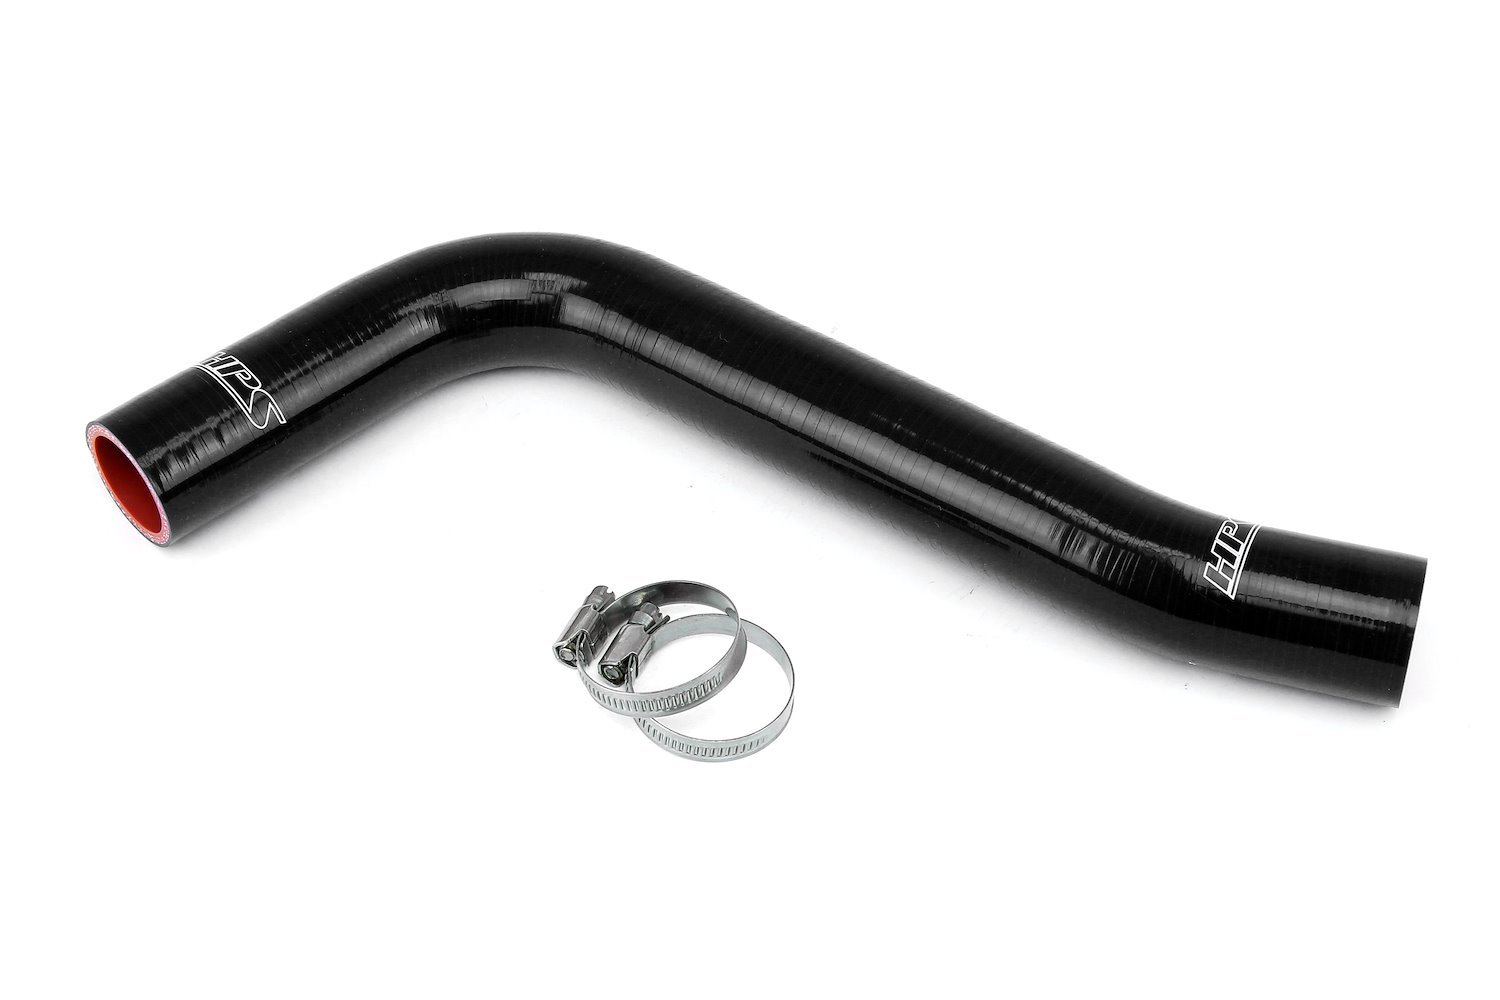 57-1885-BLK Radiator Hose Kit, 3-Ply Reinforced Silicone, Replaces Lower Rubber Radiator Coolant Hose.